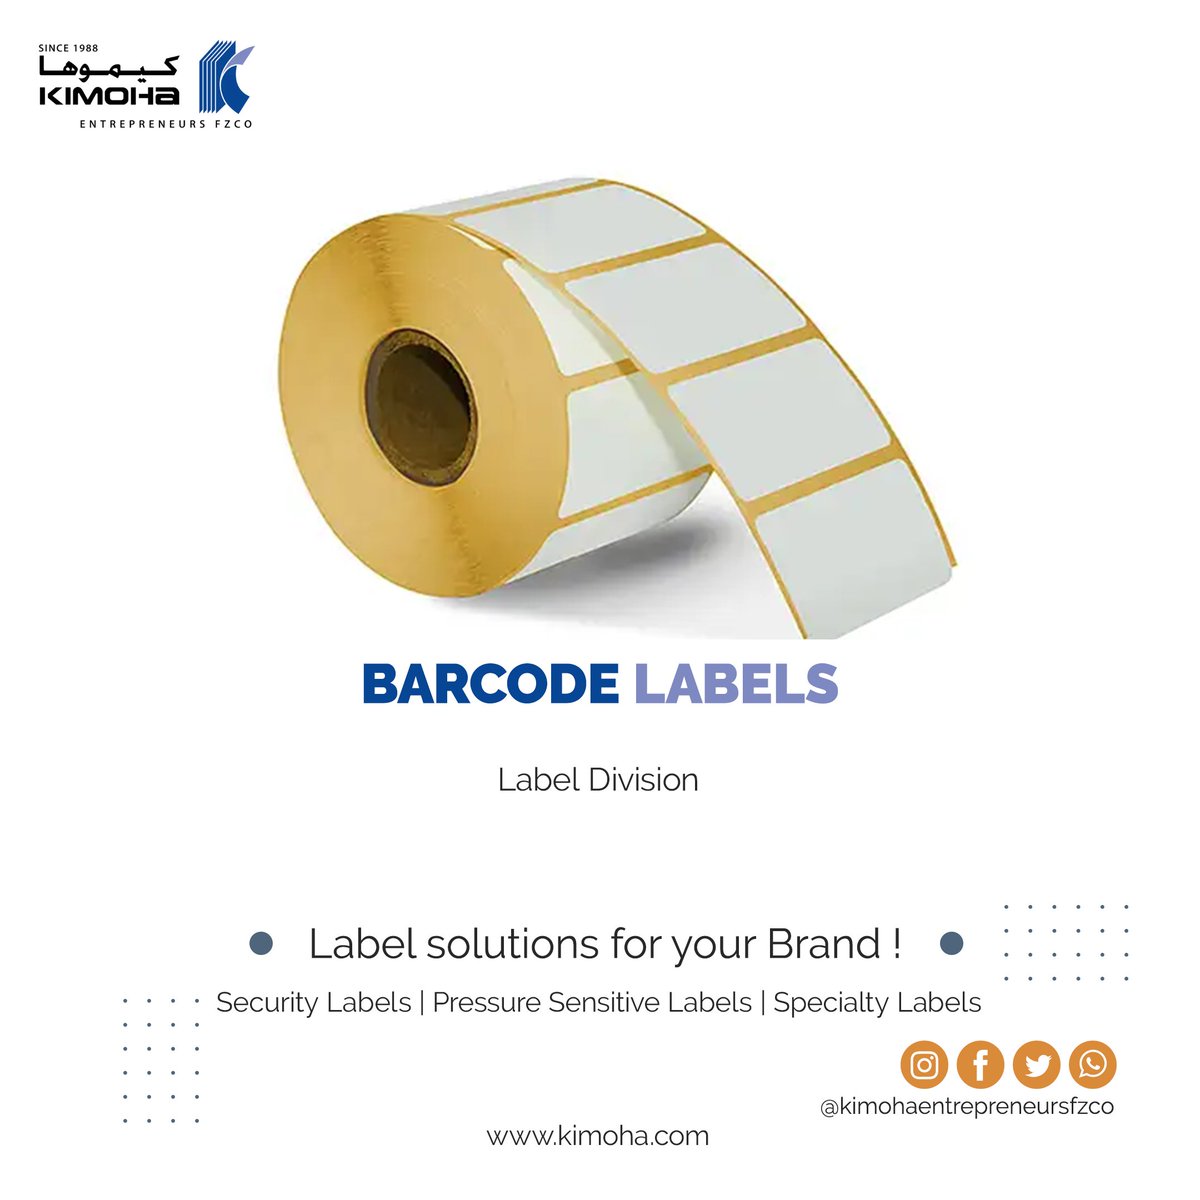 Barcode labels - synthetic/direct thermal/thermal transfer options 
visit - kimoha.com
#printingservices #printing #packagingsolutions #packaging #packagingindustry #wrapping  #uae #barcodelabels #barcodescanners #barcodeprinters #labelprinting #inventorycontrol